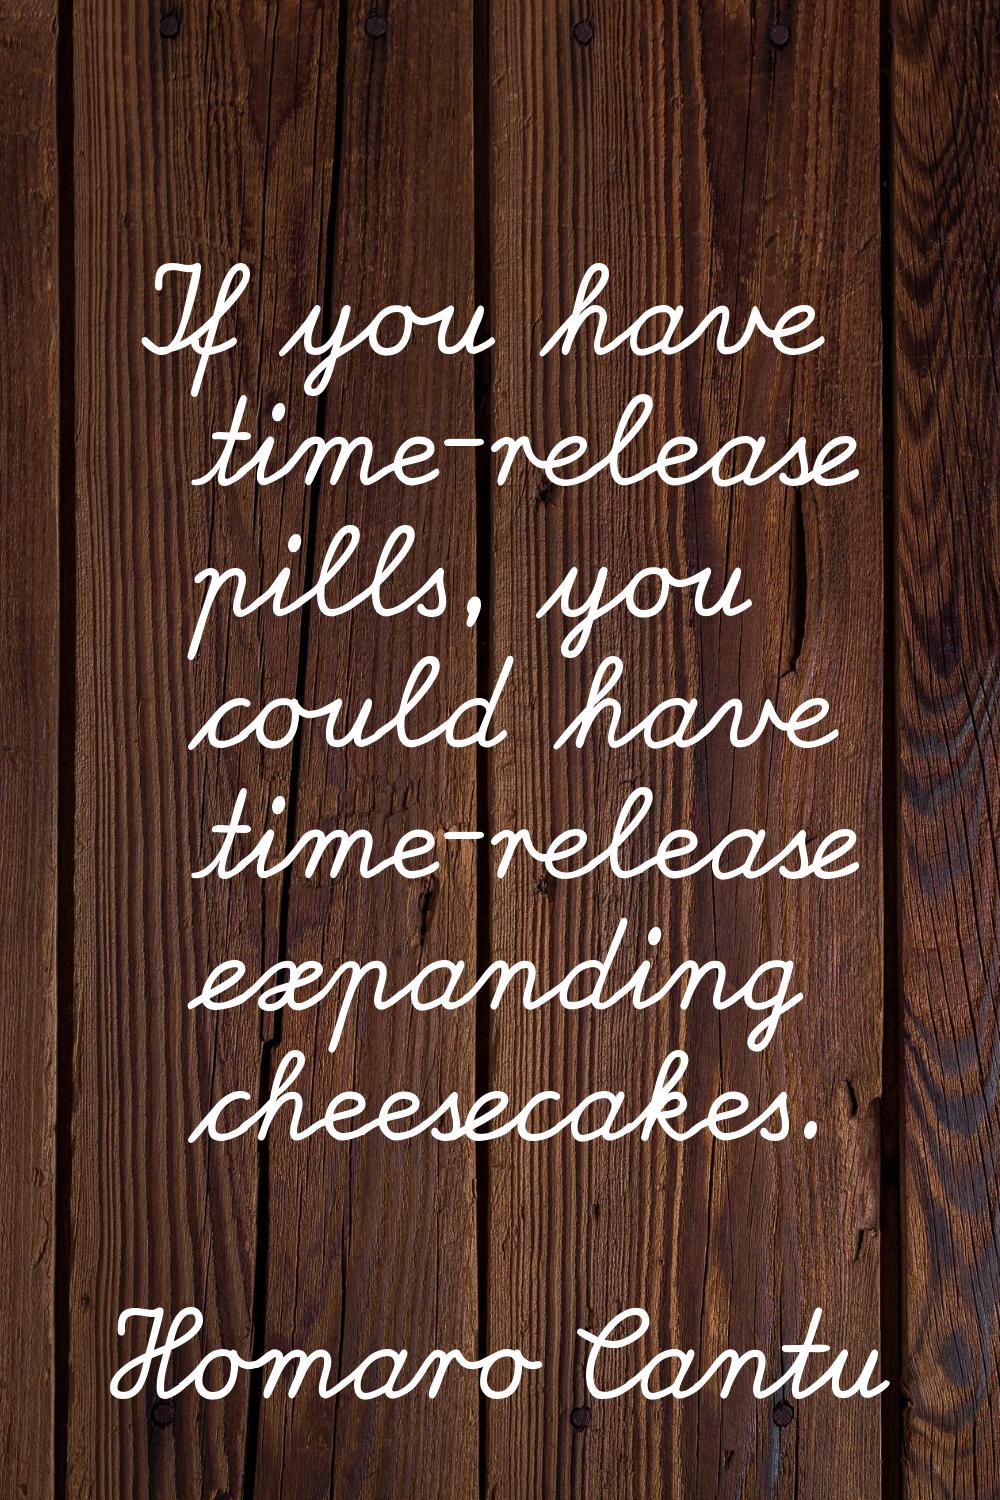 If you have time-release pills, you could have time-release expanding cheesecakes.